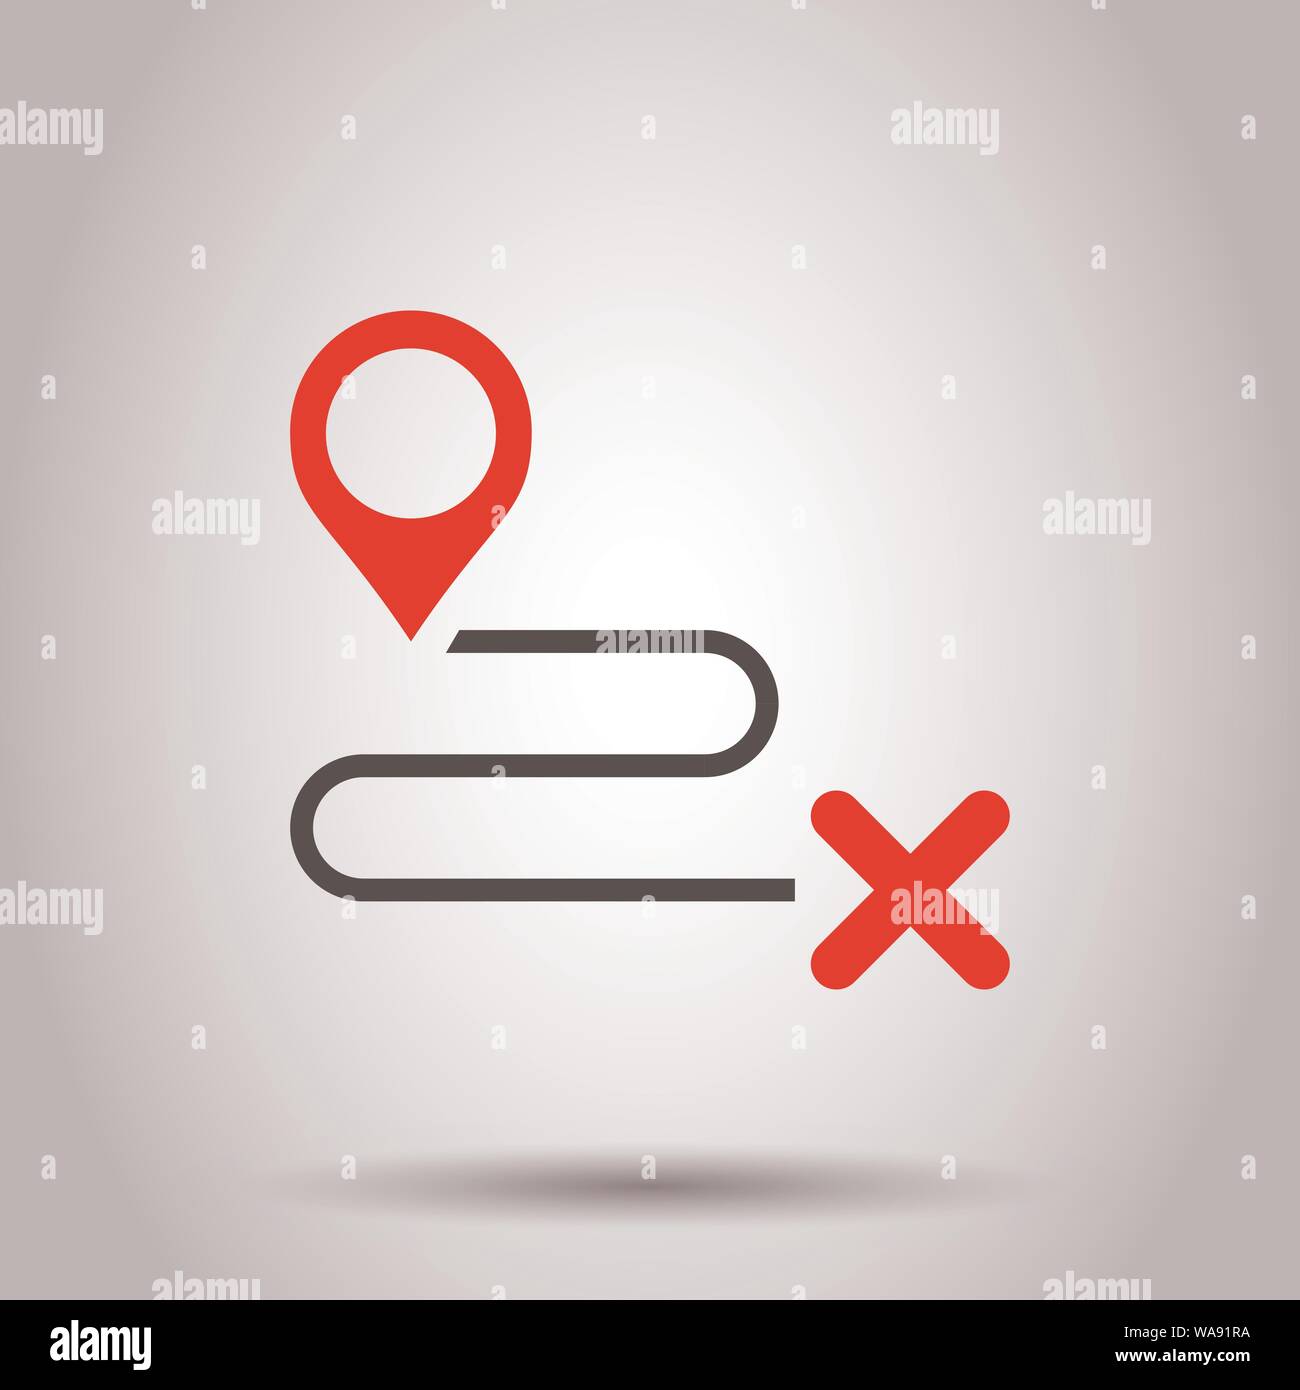 Move location icon in flat style. Pin gps vector illustration on isolated background. Navigation business concept. Stock Vector